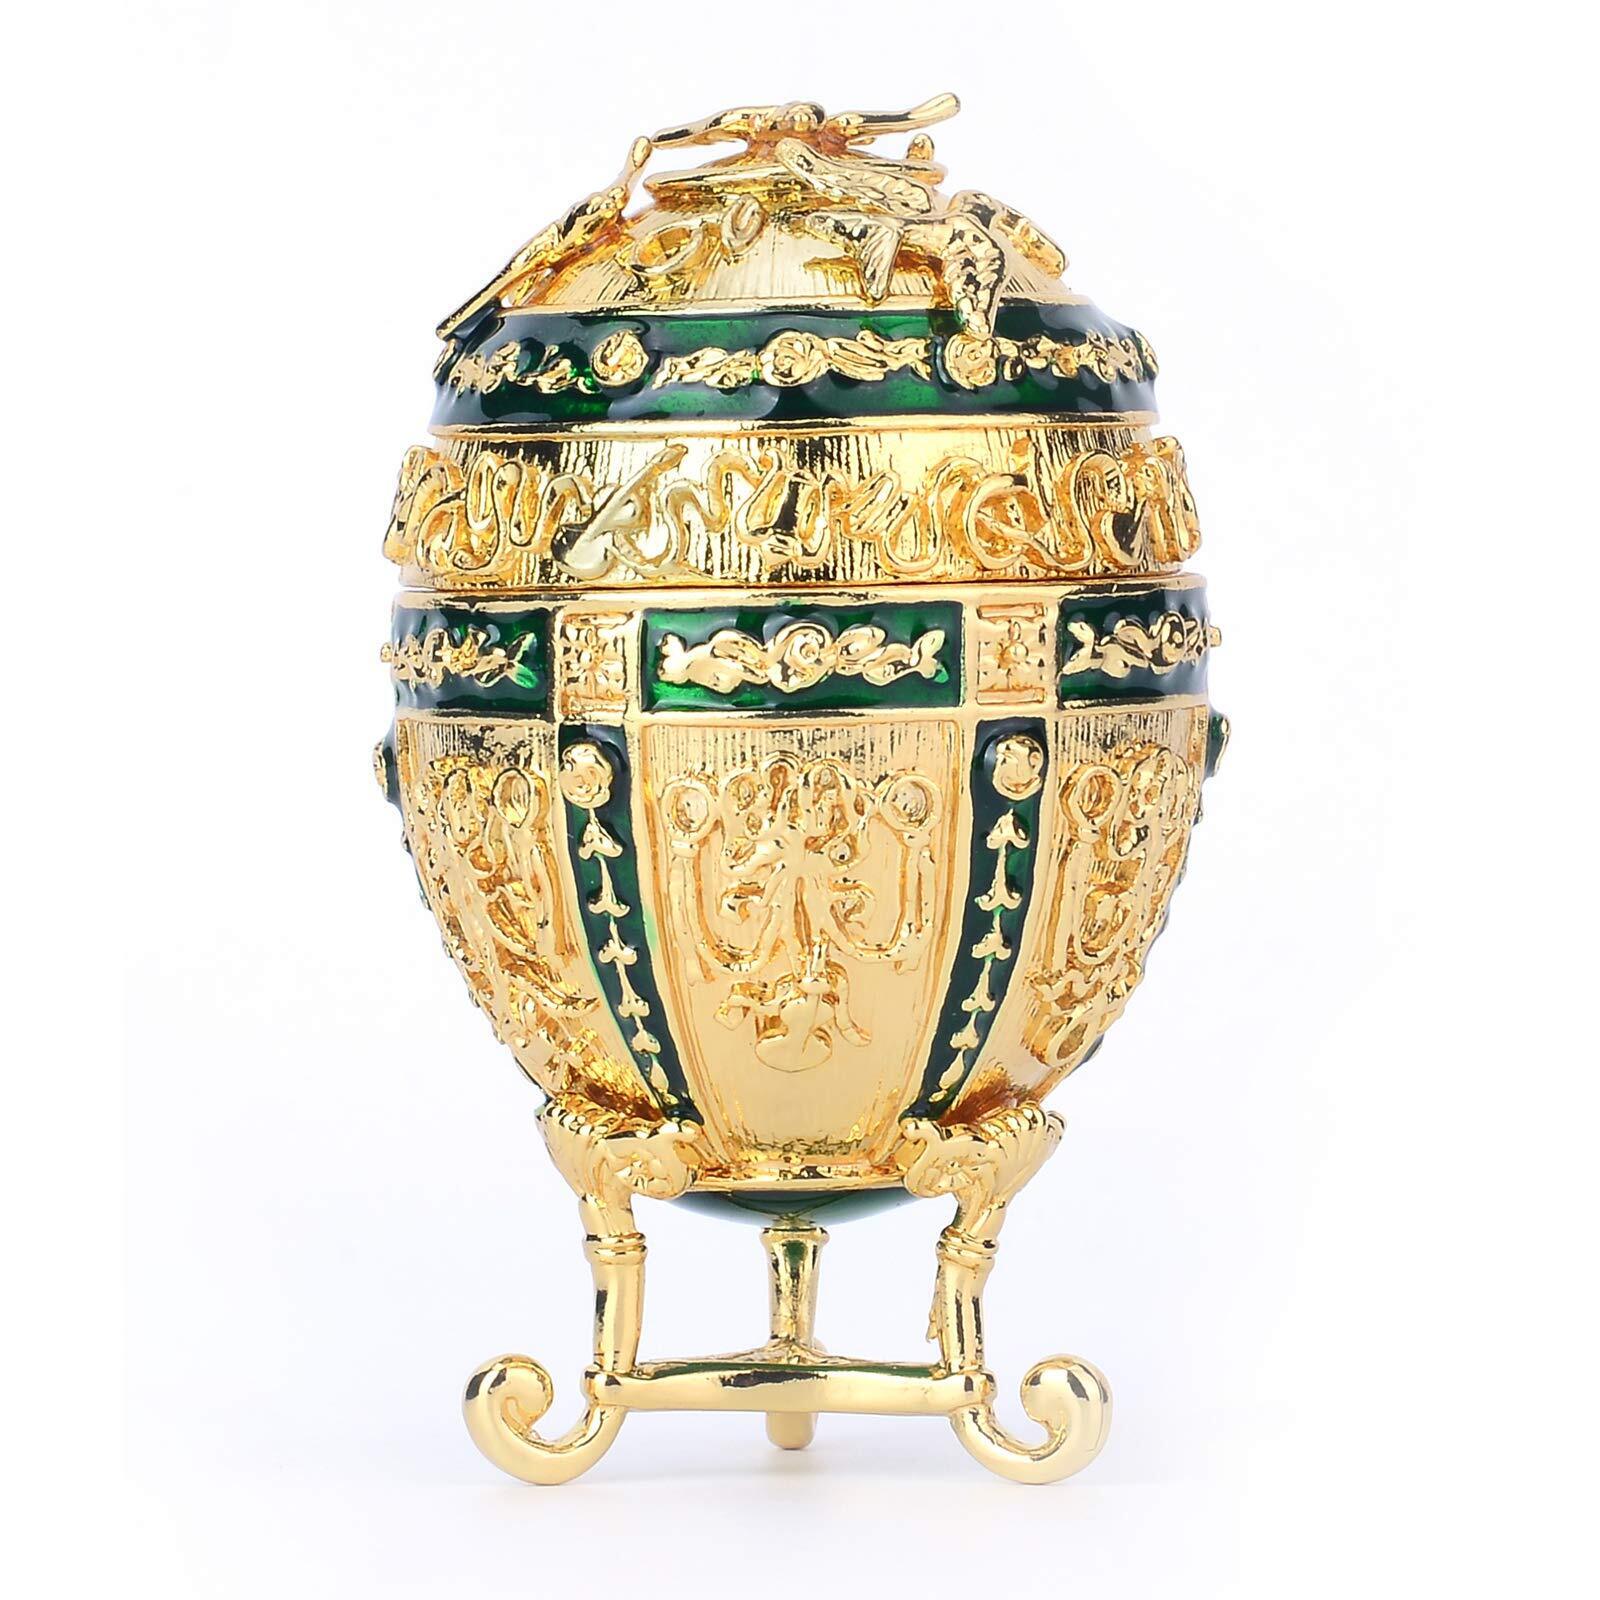 FASALINO Faberge Egg Jewelry Trinket Box Classic Hand-Painted Ornaments Metal...